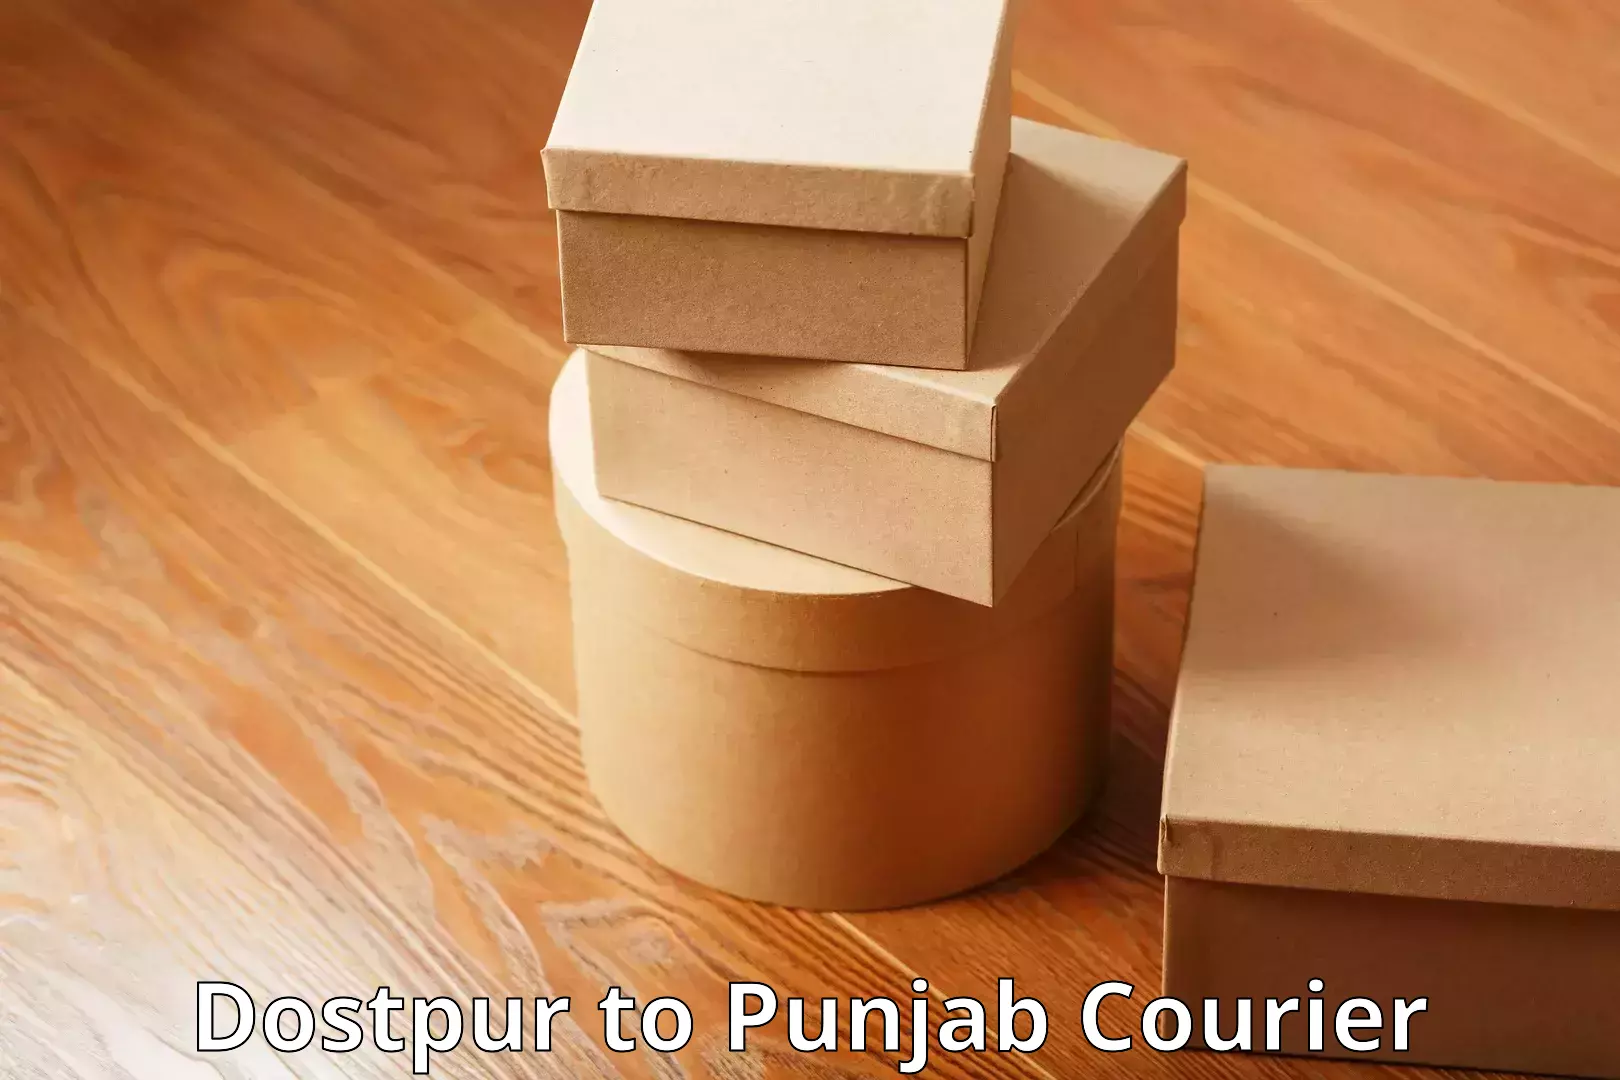 Luggage shipment specialists Dostpur to Punjab